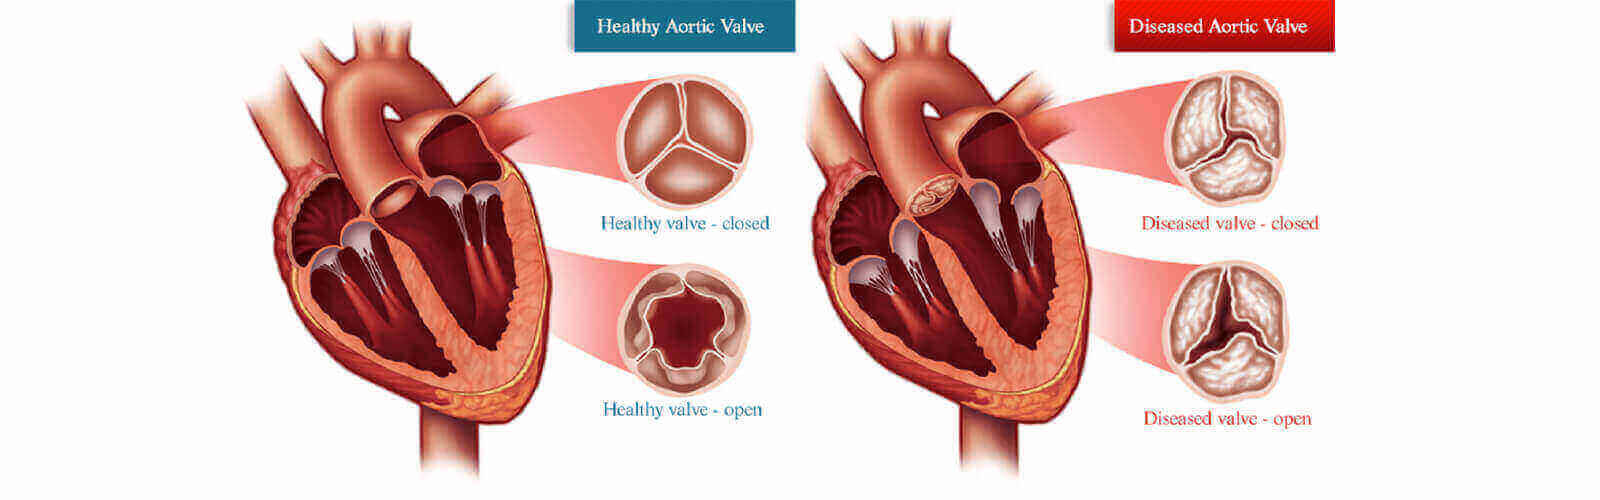 Heart Valve Replacement Surgery in Iraq